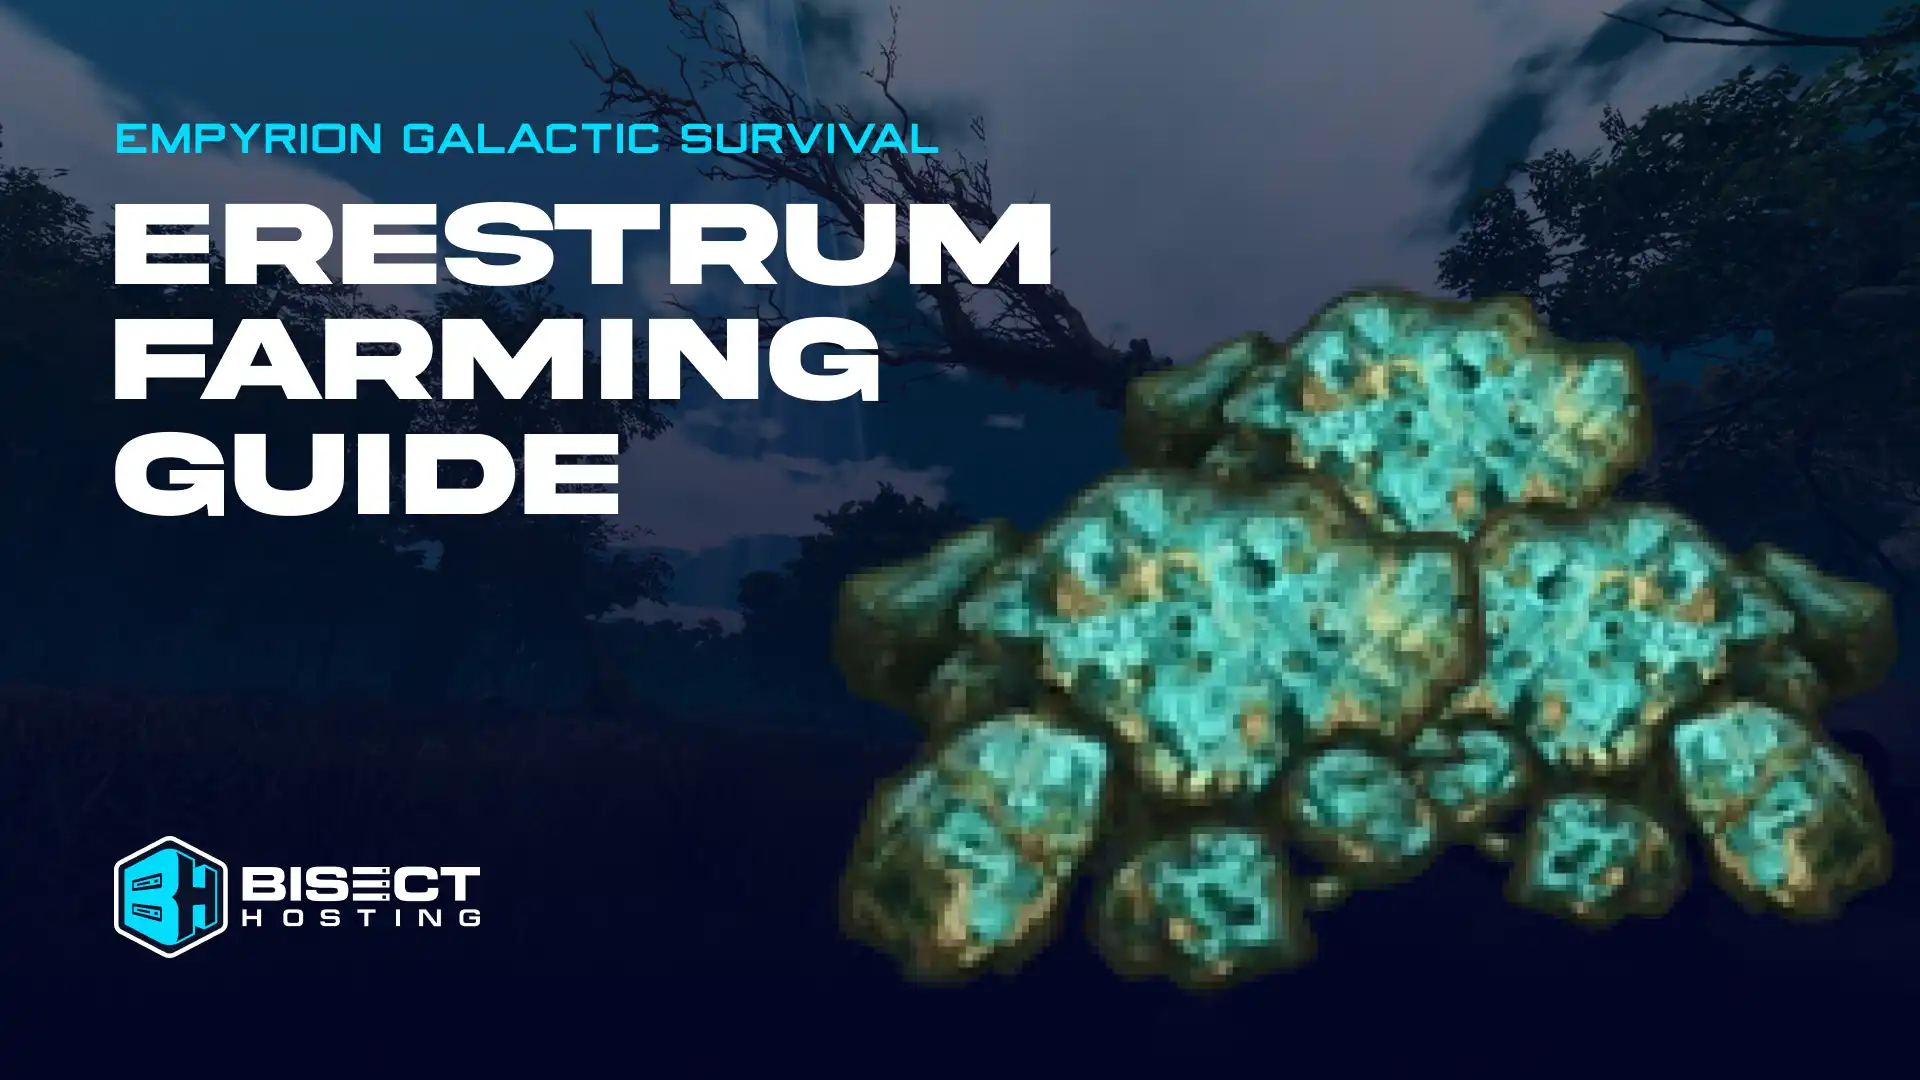 Empyrion - Galactic Survival Erestrum Farming Guide: Crafting, Location, & Uses